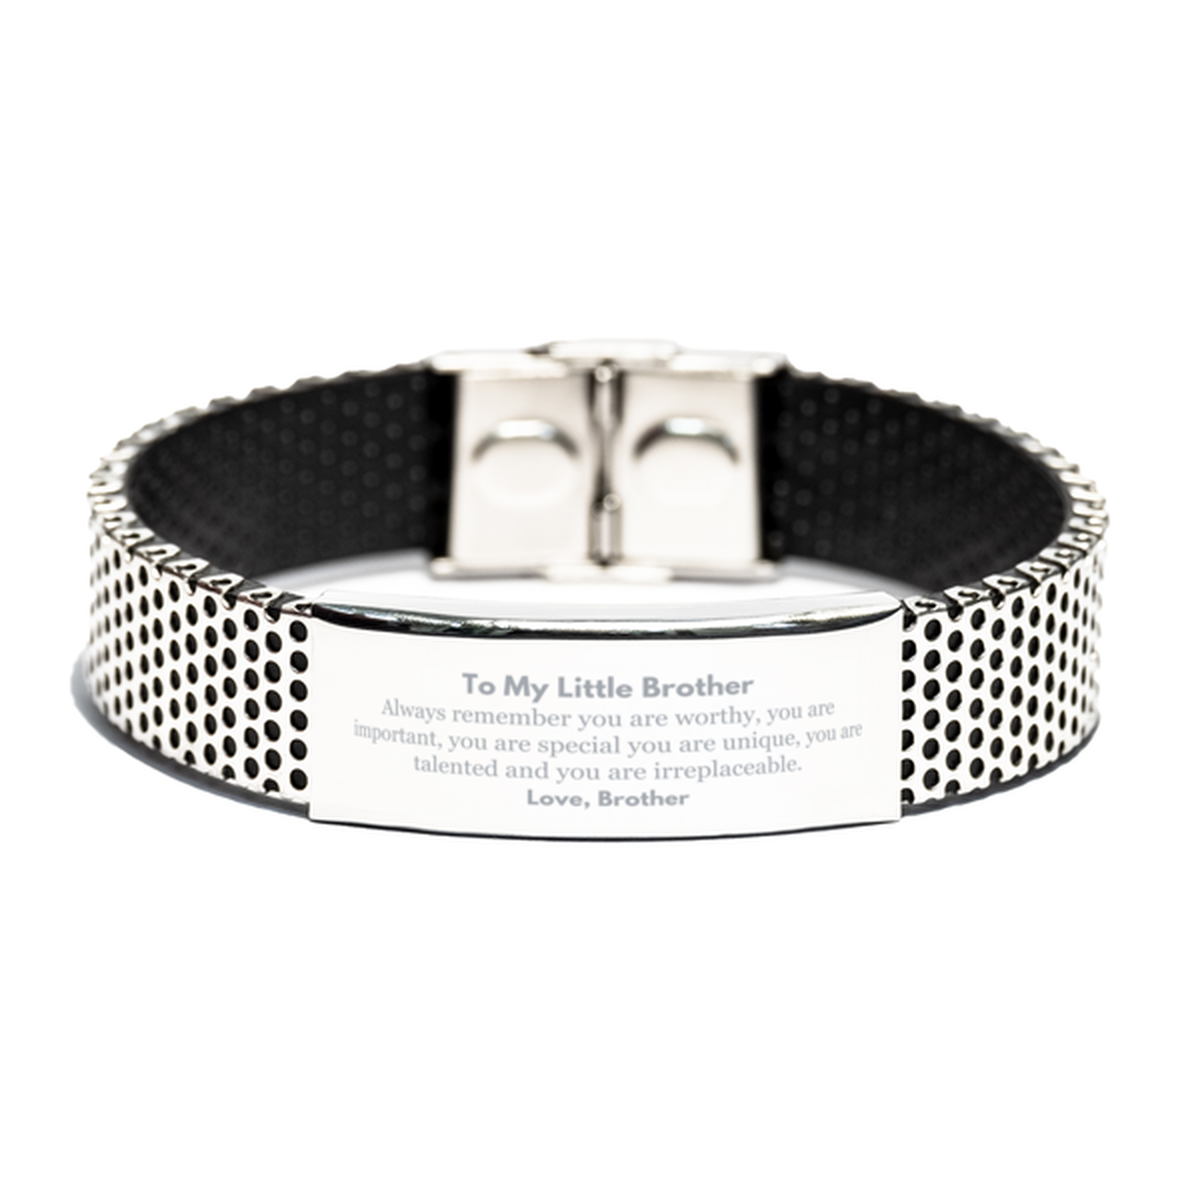 Little Brother Birthday Gifts from Brother, Inspirational Stainless Steel Bracelet for Little Brother Christmas Graduation Gifts for Little Brother Always remember you are worthy, you are important. Love, Brother